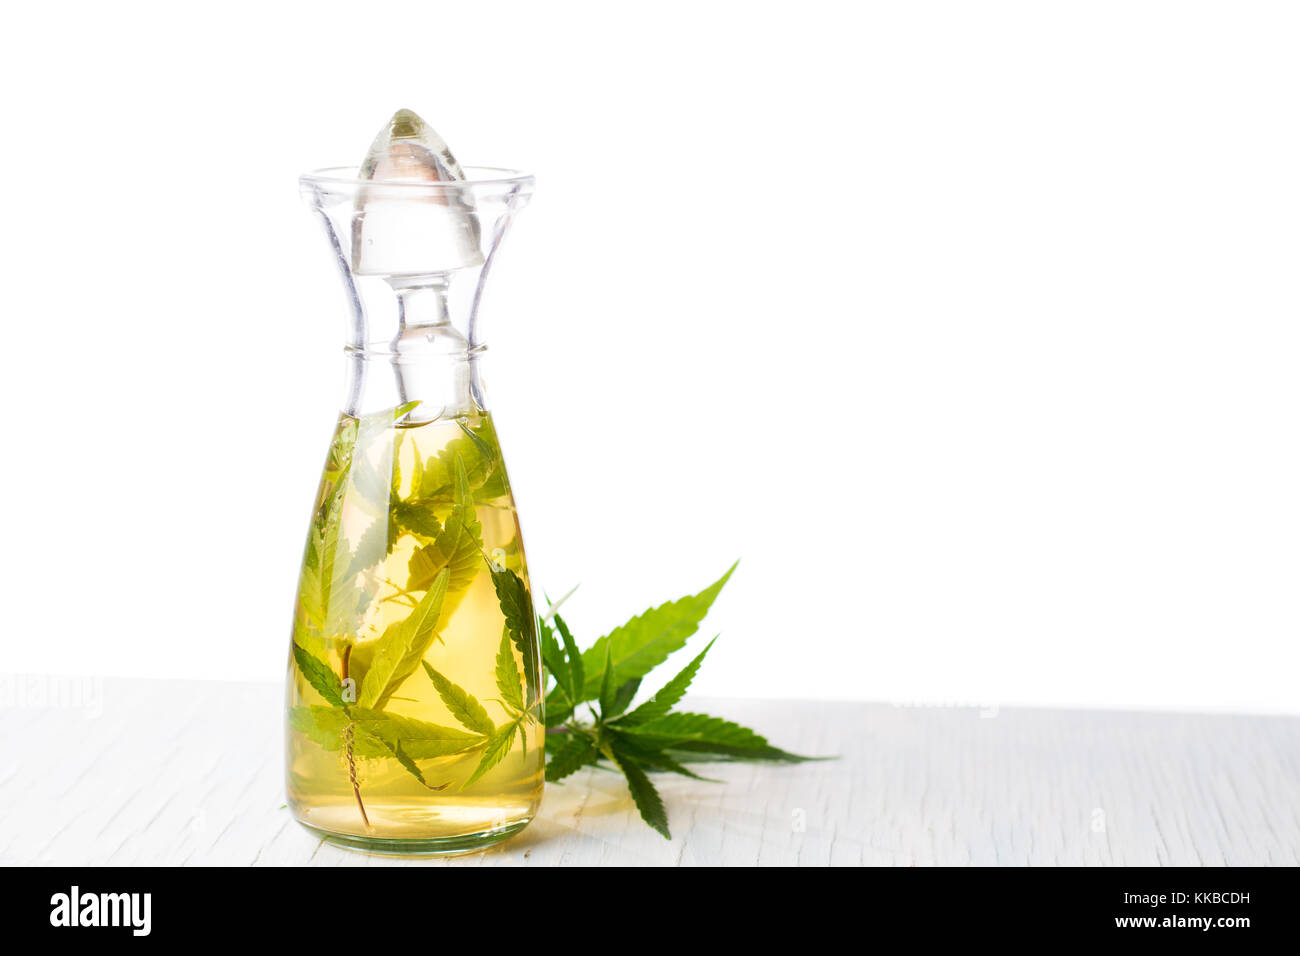 Marijuana alcohol drink in a bottle with leaves Stock Photo